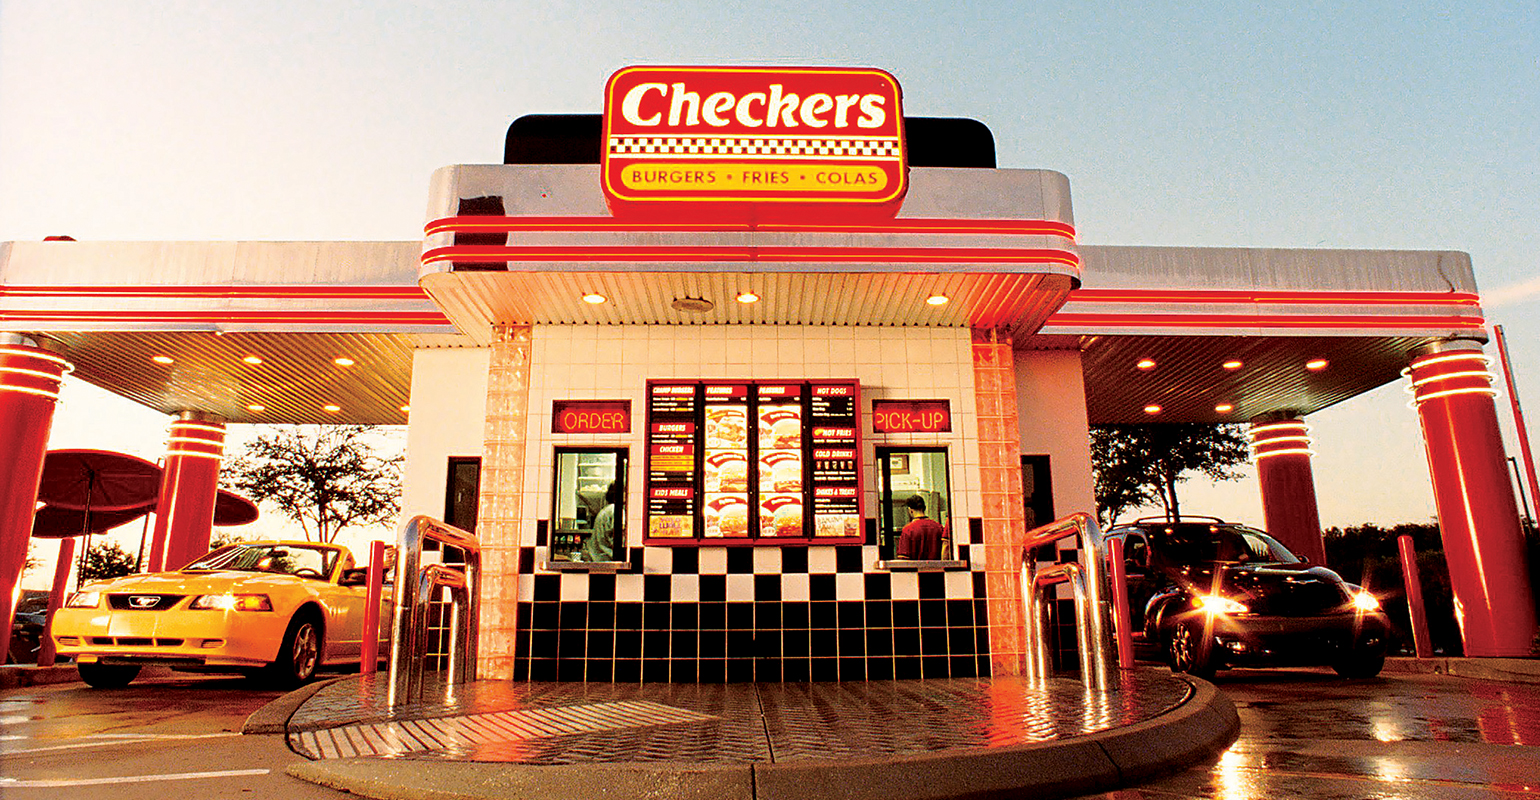 For Checkers, sale validates company’s growth